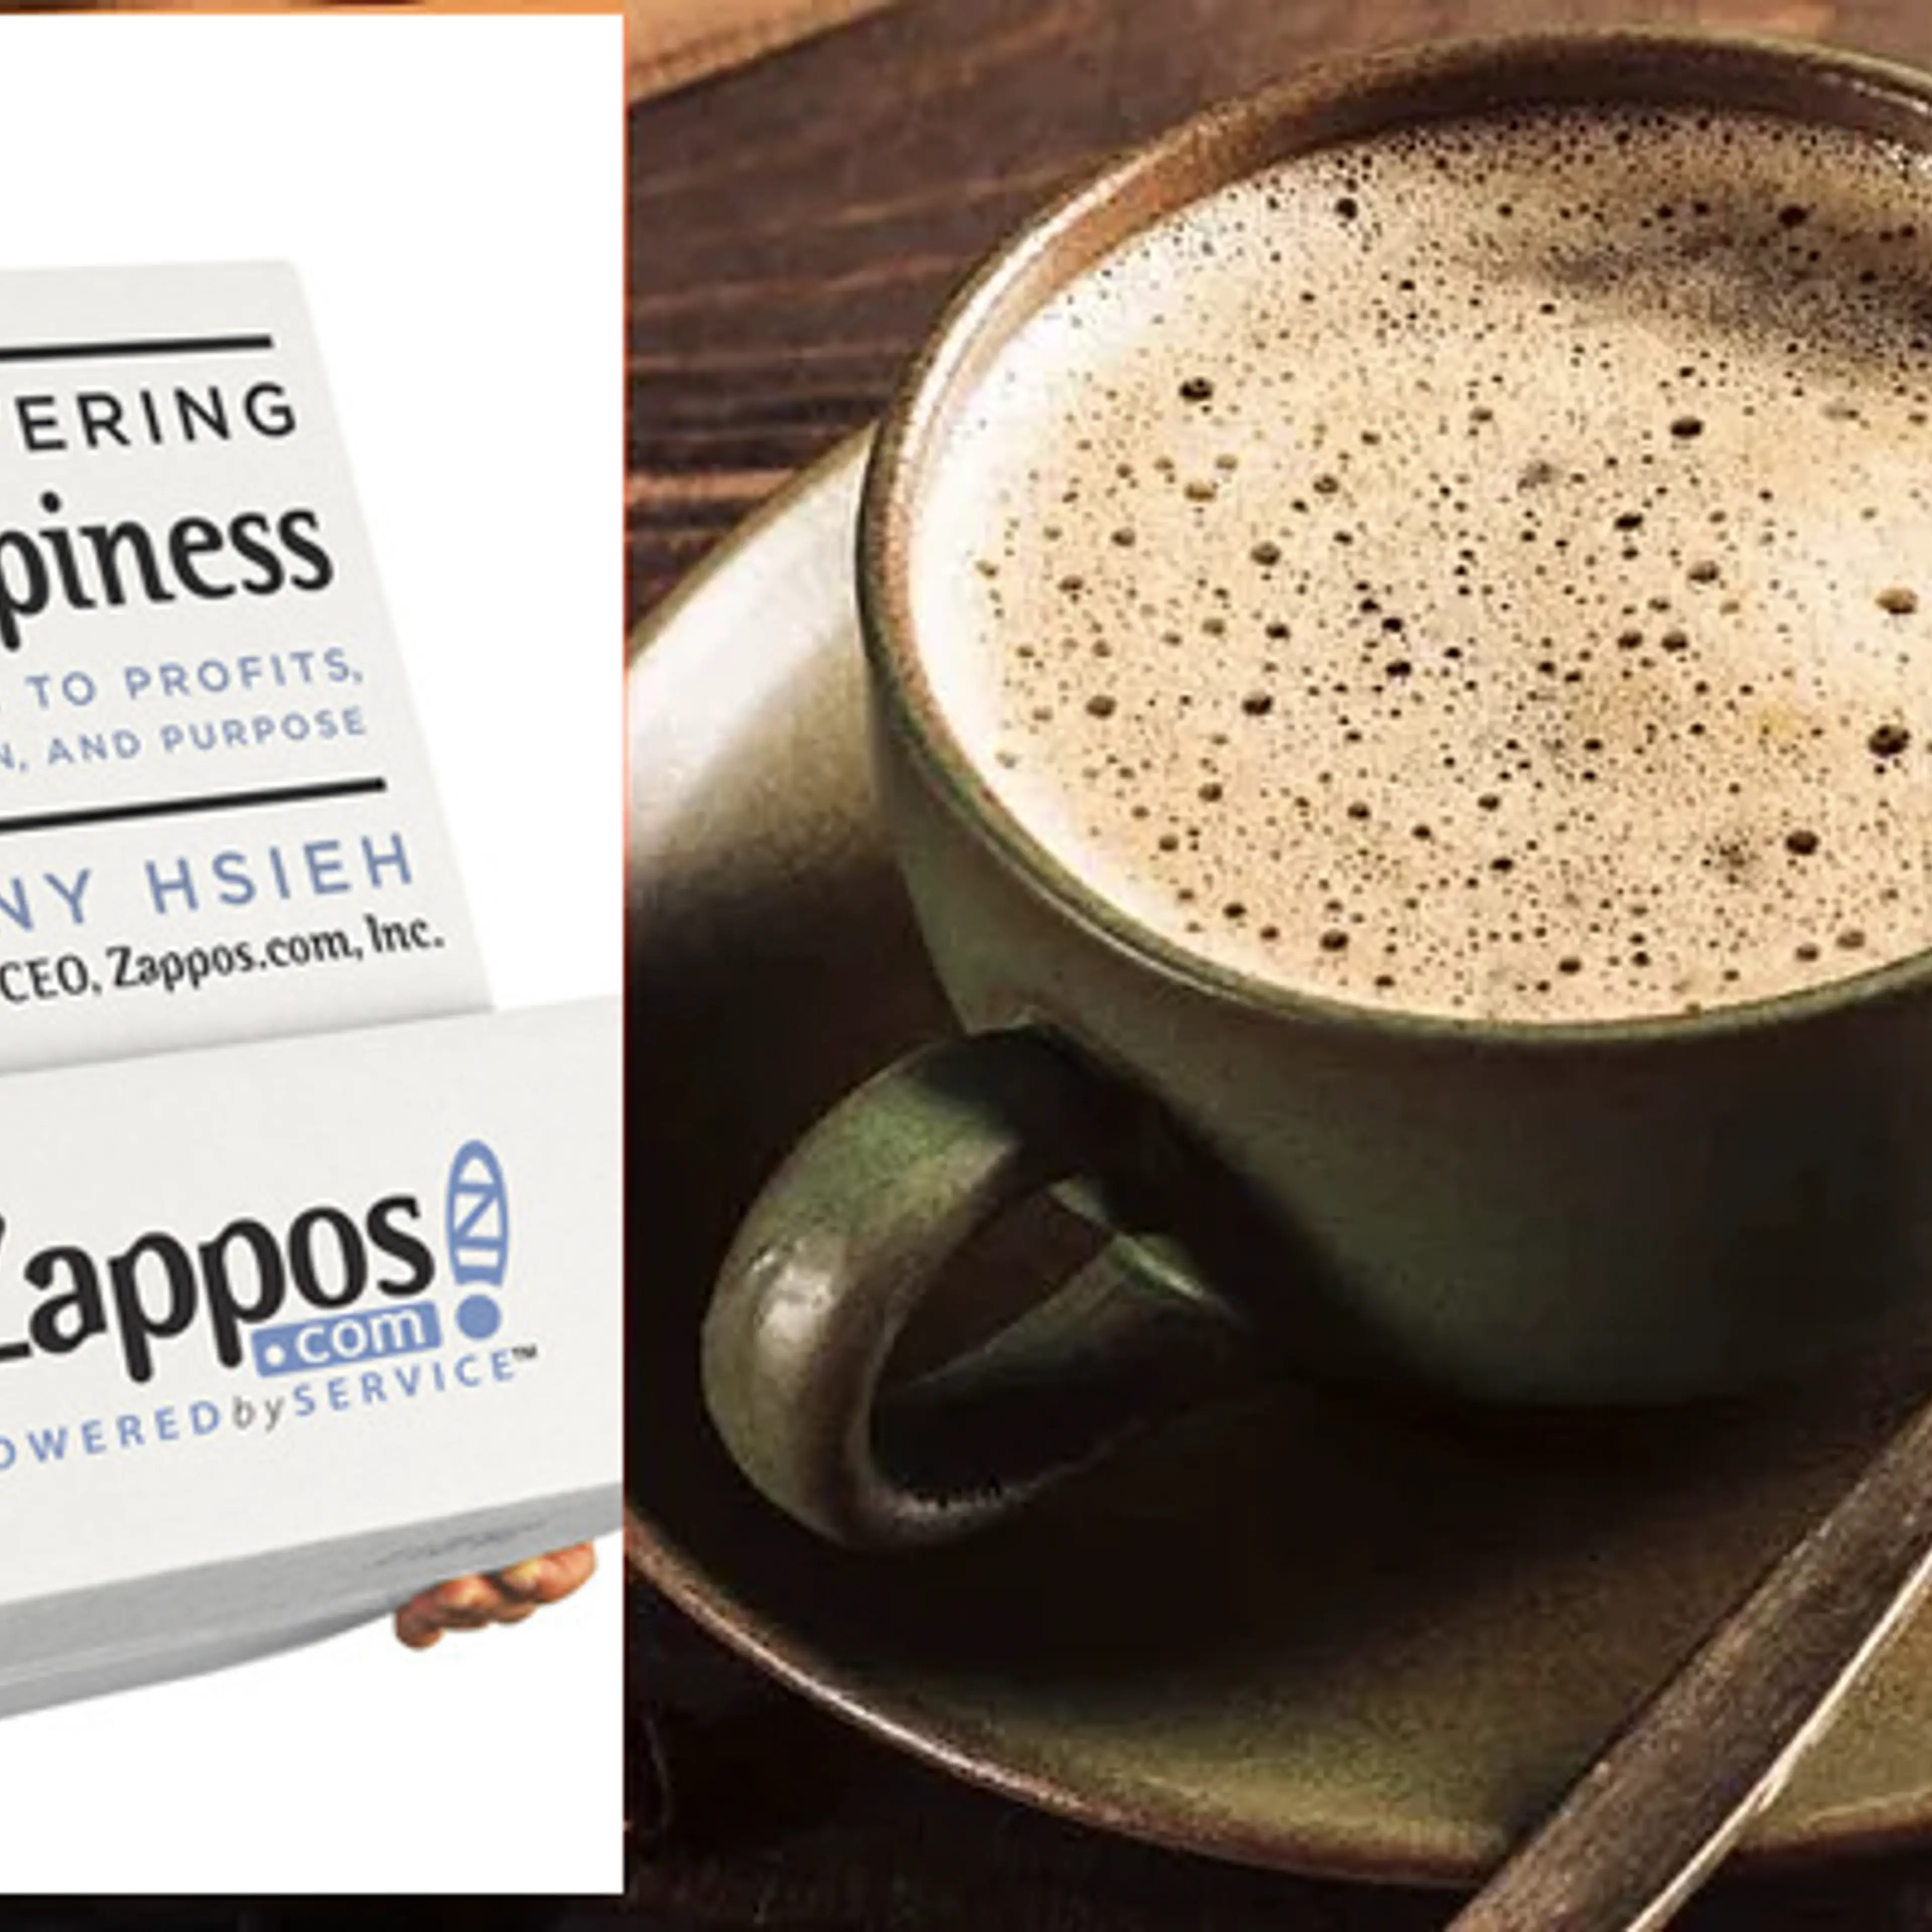 [YS Learn] 4 key lessons startups can learn from Zappos for high team productivity 